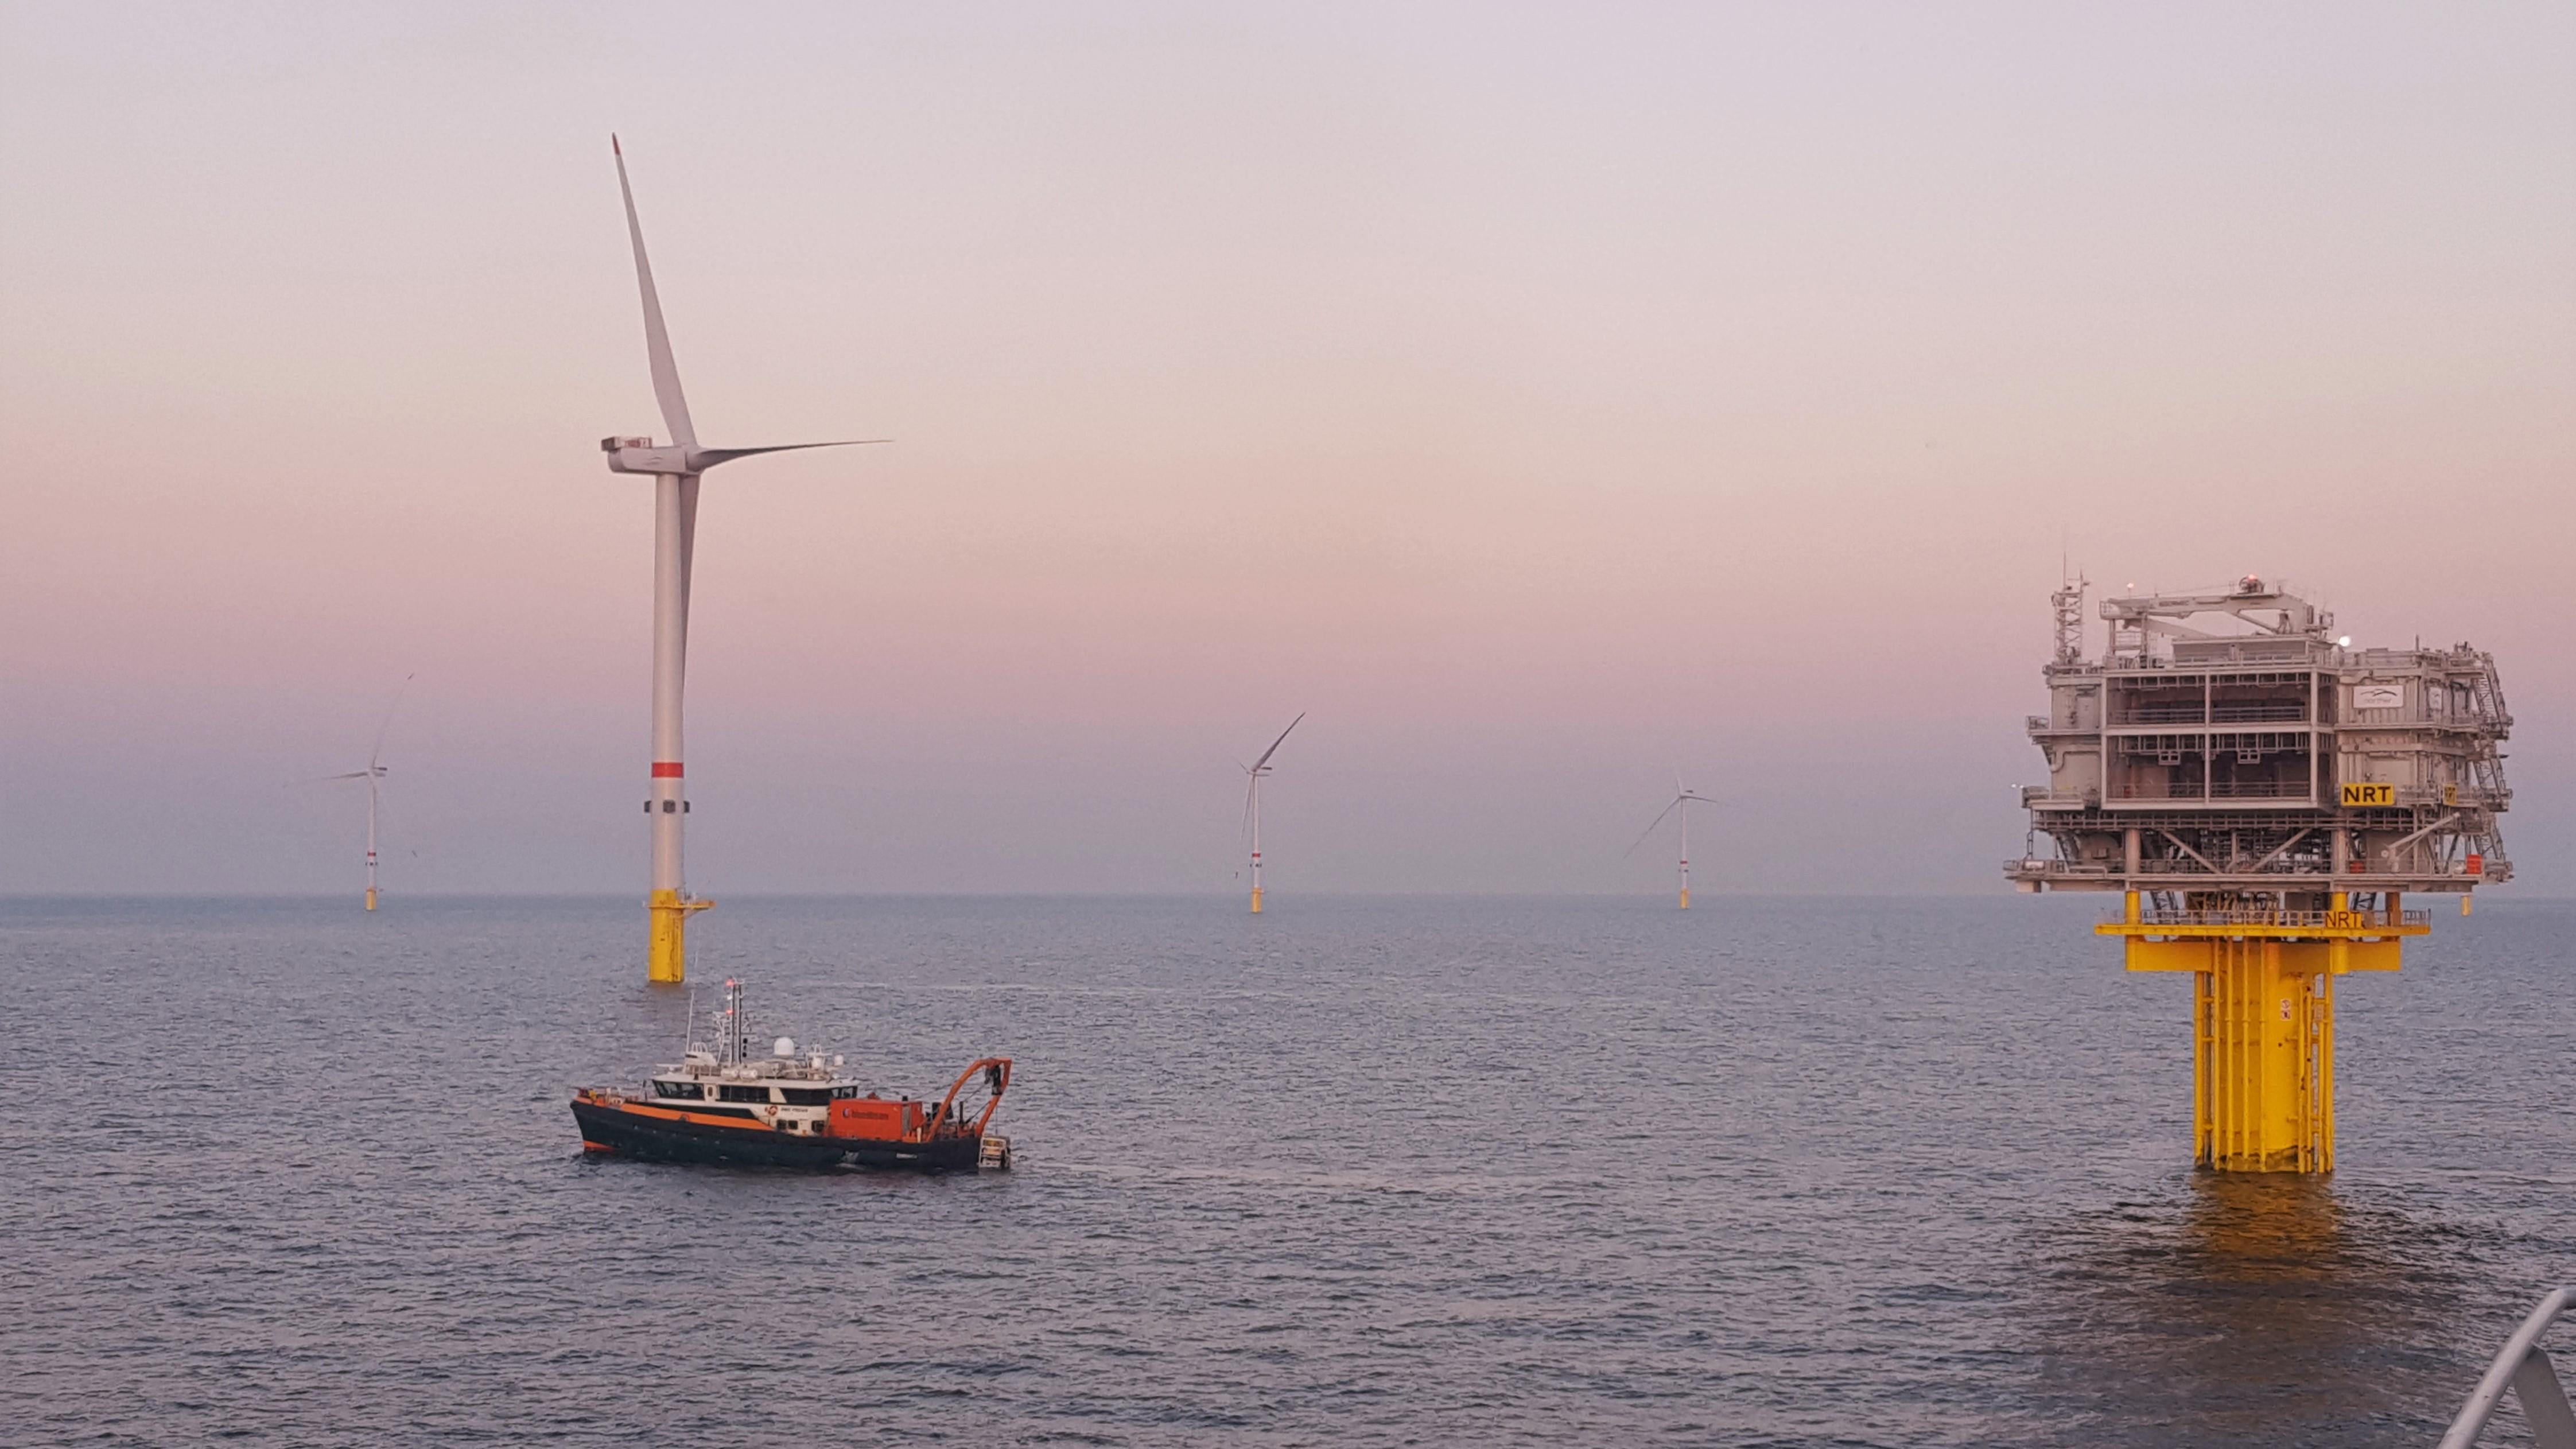 A photo of the Norther OHVS and one wind turbine